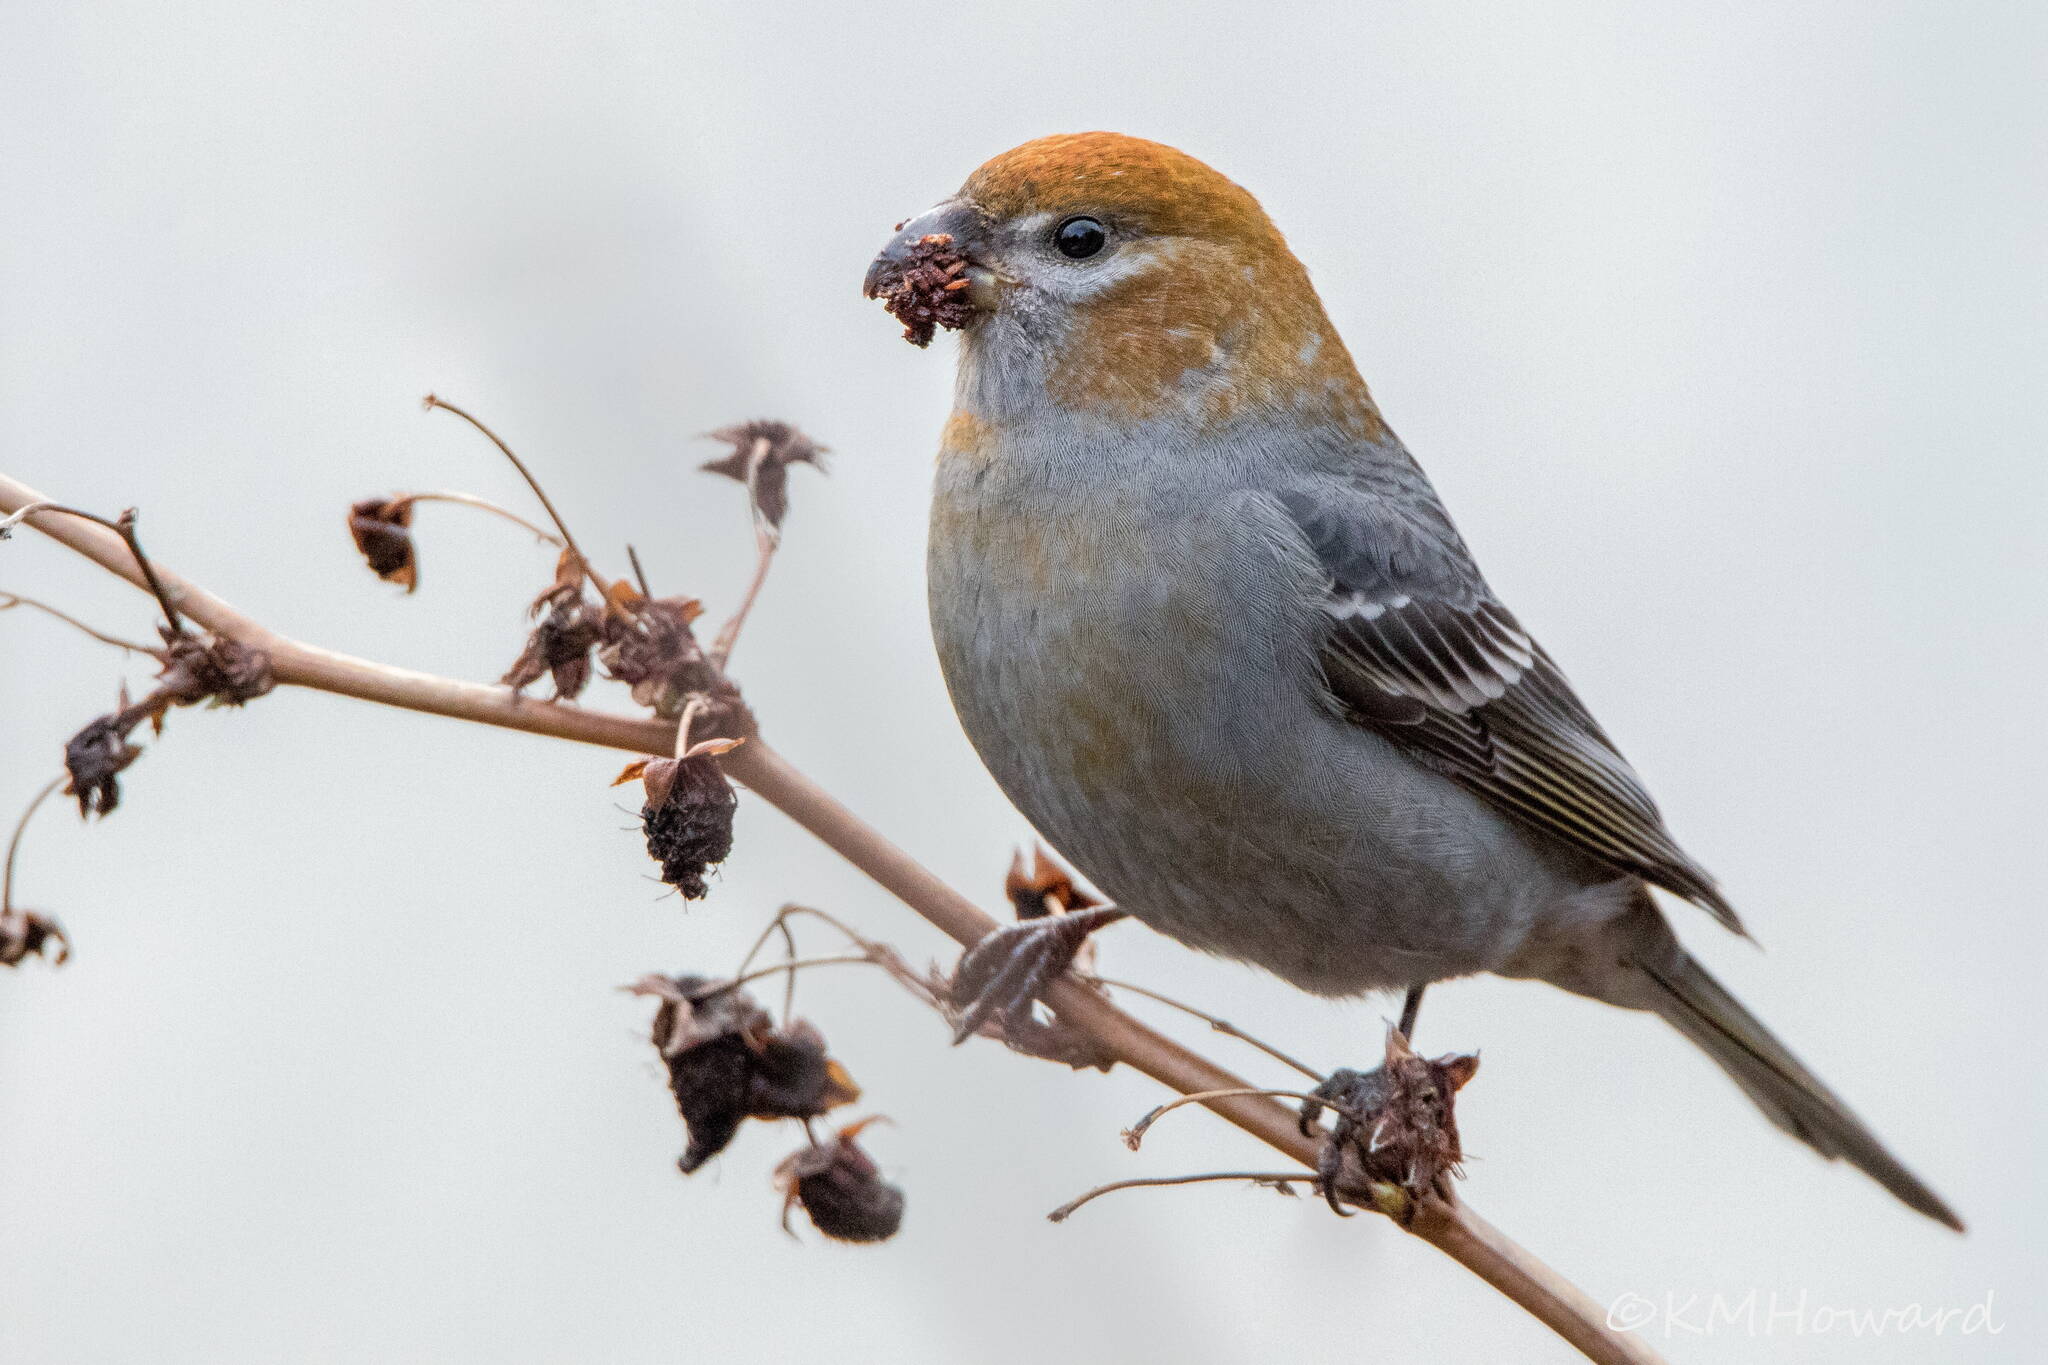 A pine grosbeak munches on some old berries. (Photo by Kerry Howard)